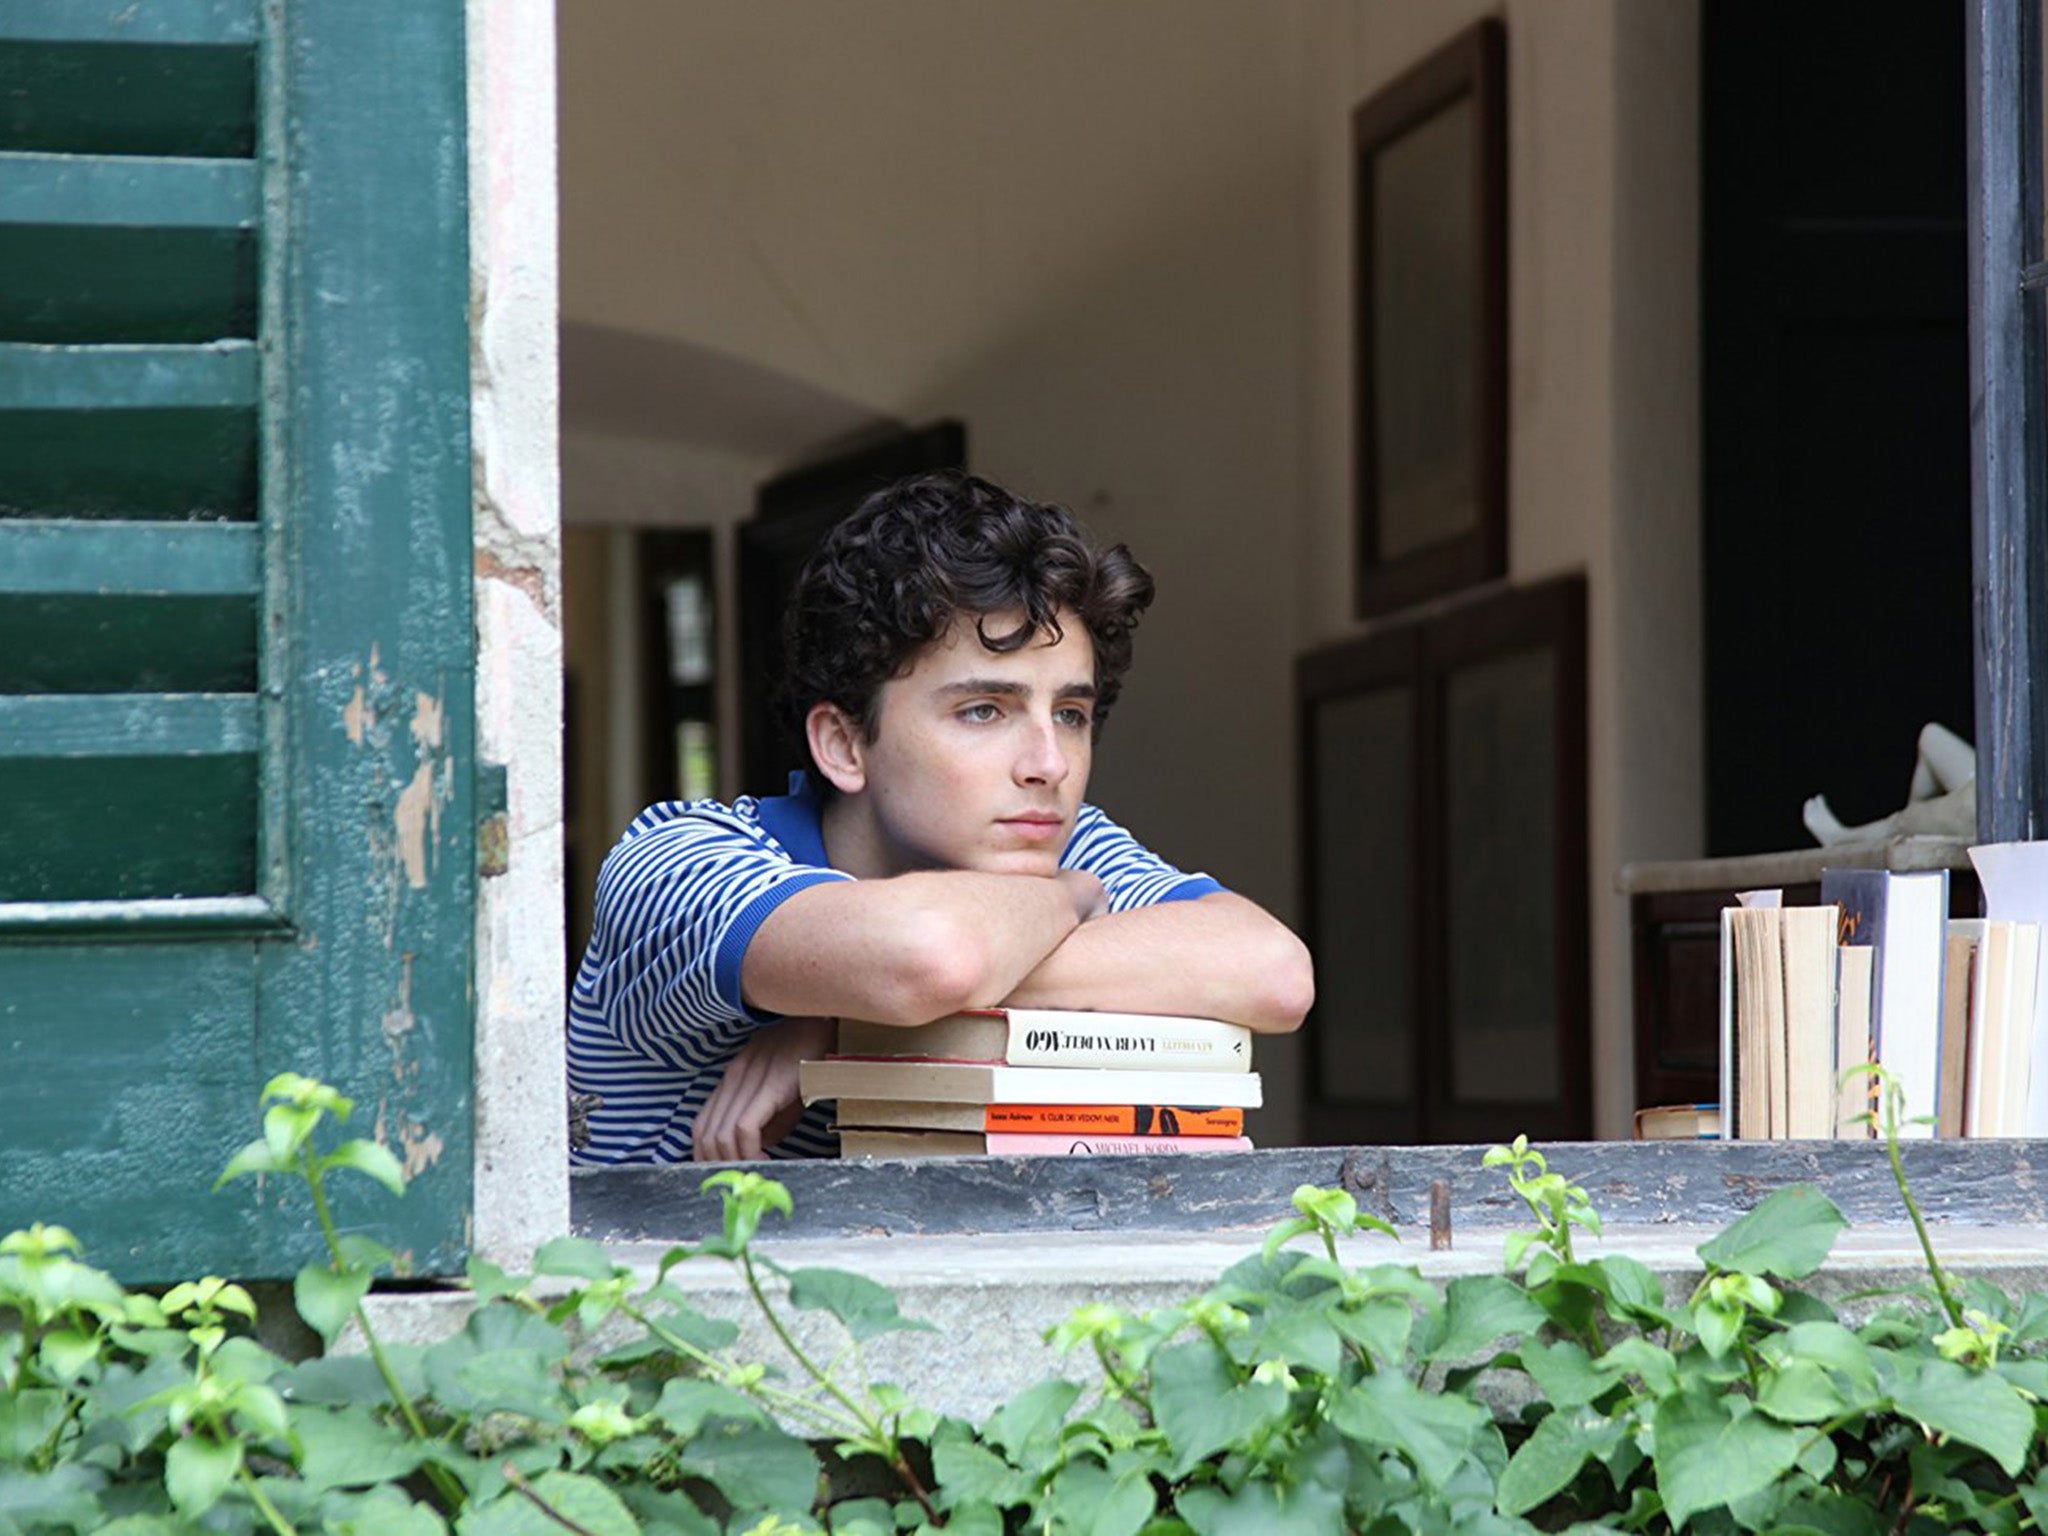 Timothée Chalamet in 'Call Me by Your Name.' Credit: Sony Pictures Classics.